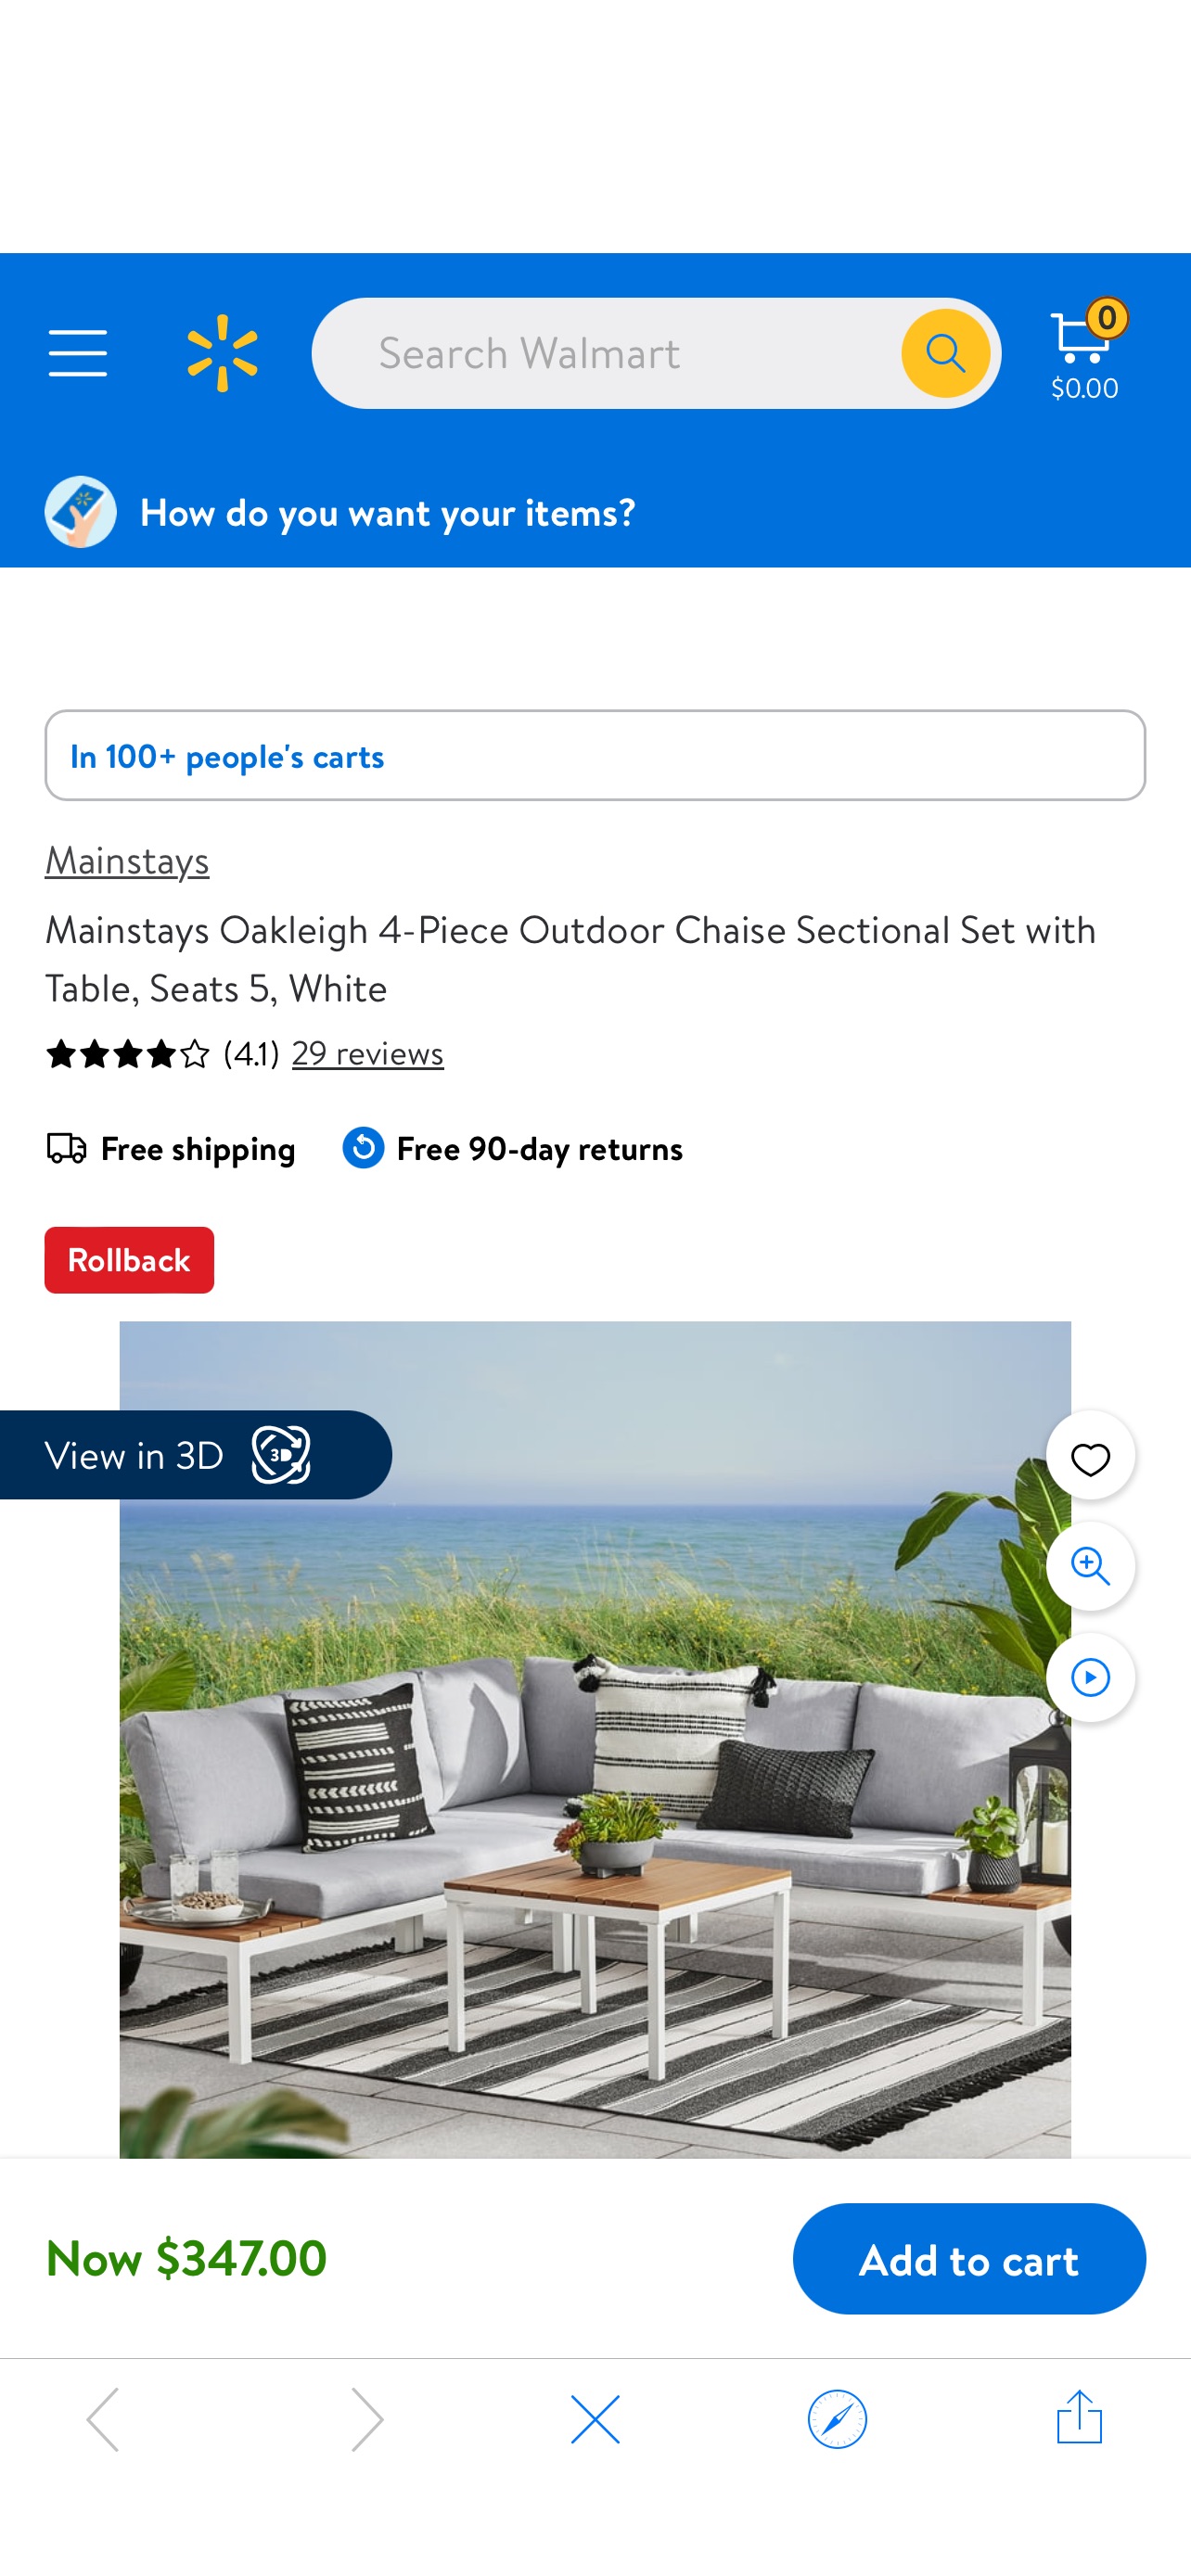 Mainstays Oakleigh 4-Piece Outdoor Chaise Sectional Set with Table, Seats 5, White - Walmart.com